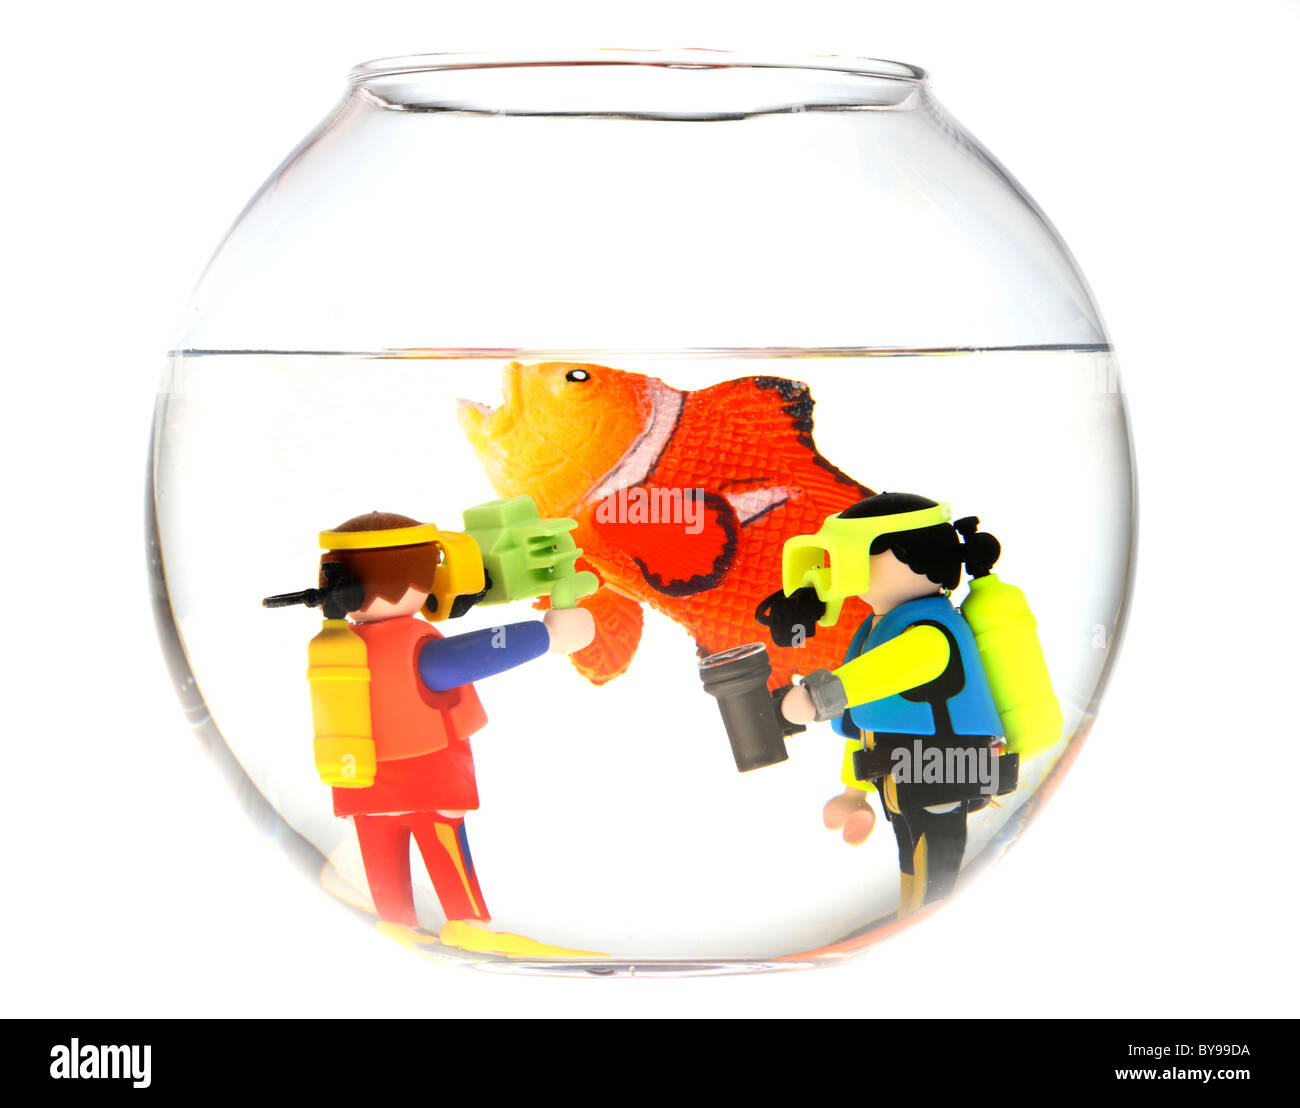 Diver taking underwater photos in a fish bowl. Stock Photo